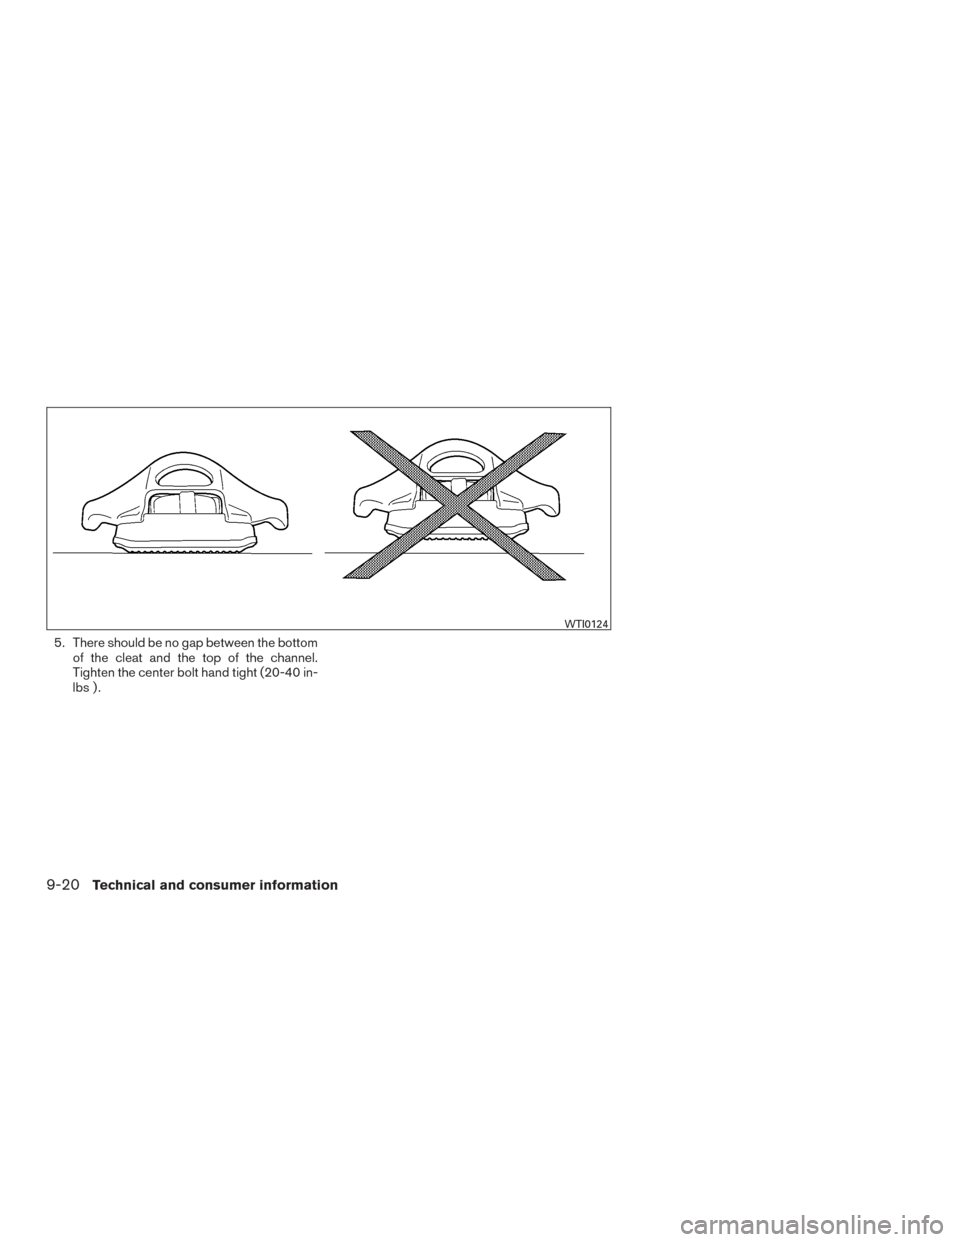 NISSAN TITAN 2015 1.G Owners Manual 5. There should be no gap between the bottomof the cleat and the top of the channel.
Tighten the center bolt hand tight (20-40 in-
lbs ) .
WTI0124
9-20Technical and consumer information 